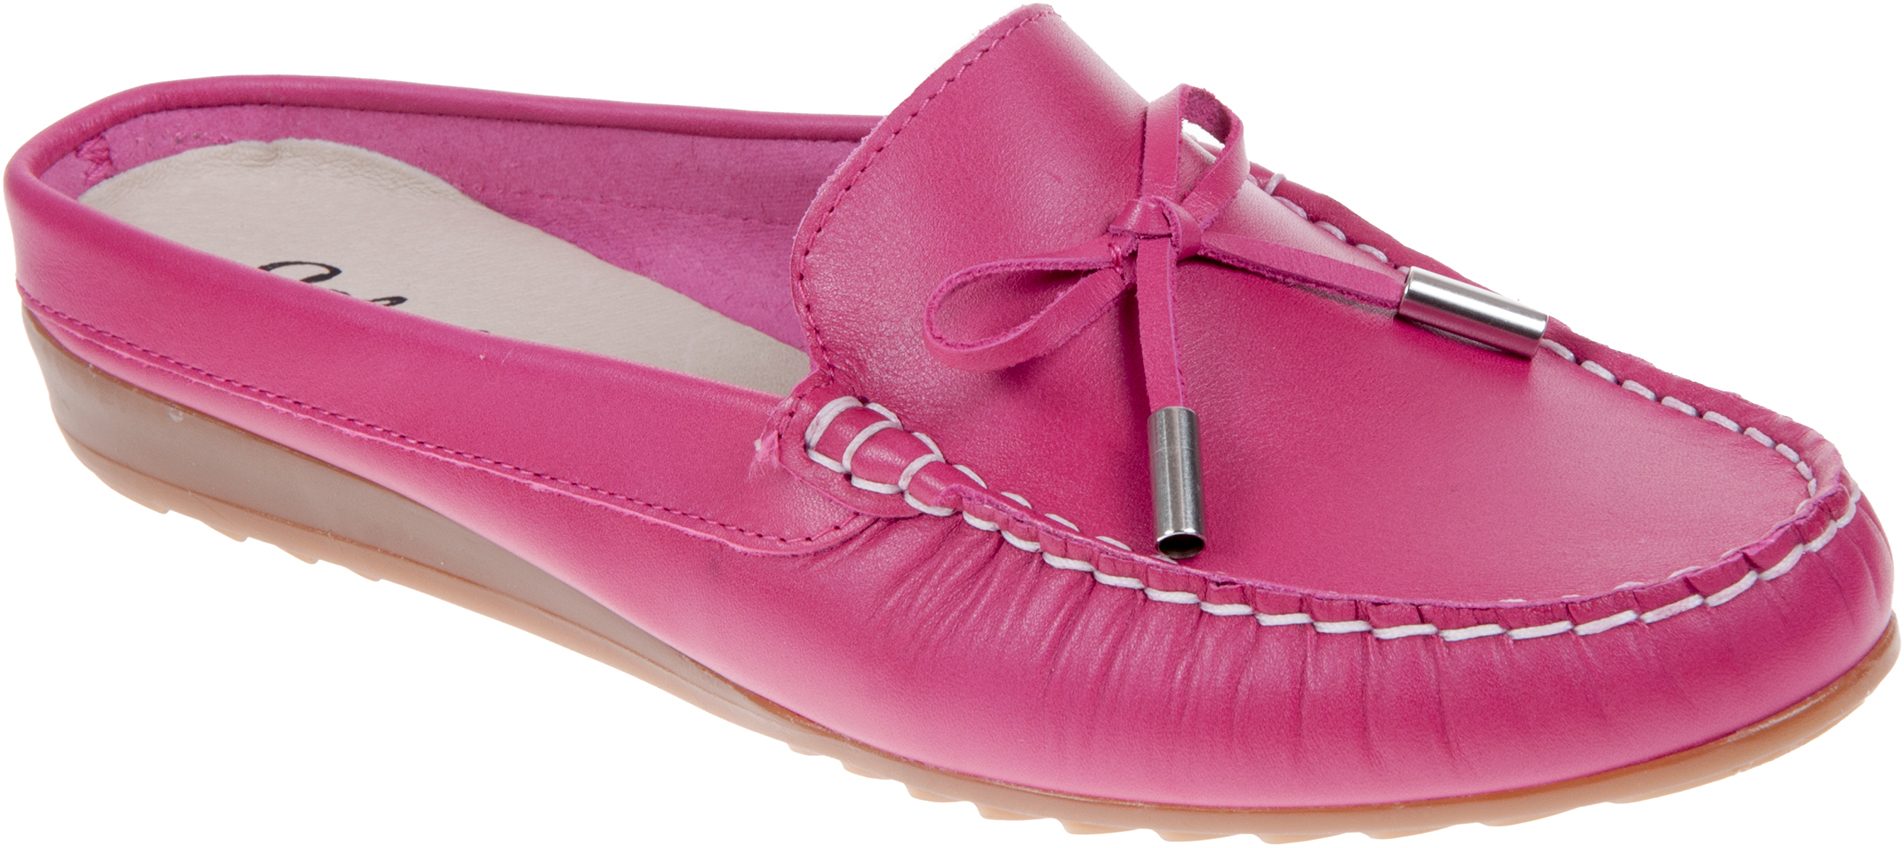 Cefalu 10057 Pink 10057 - Everyday Shoes - Humphries Shoes